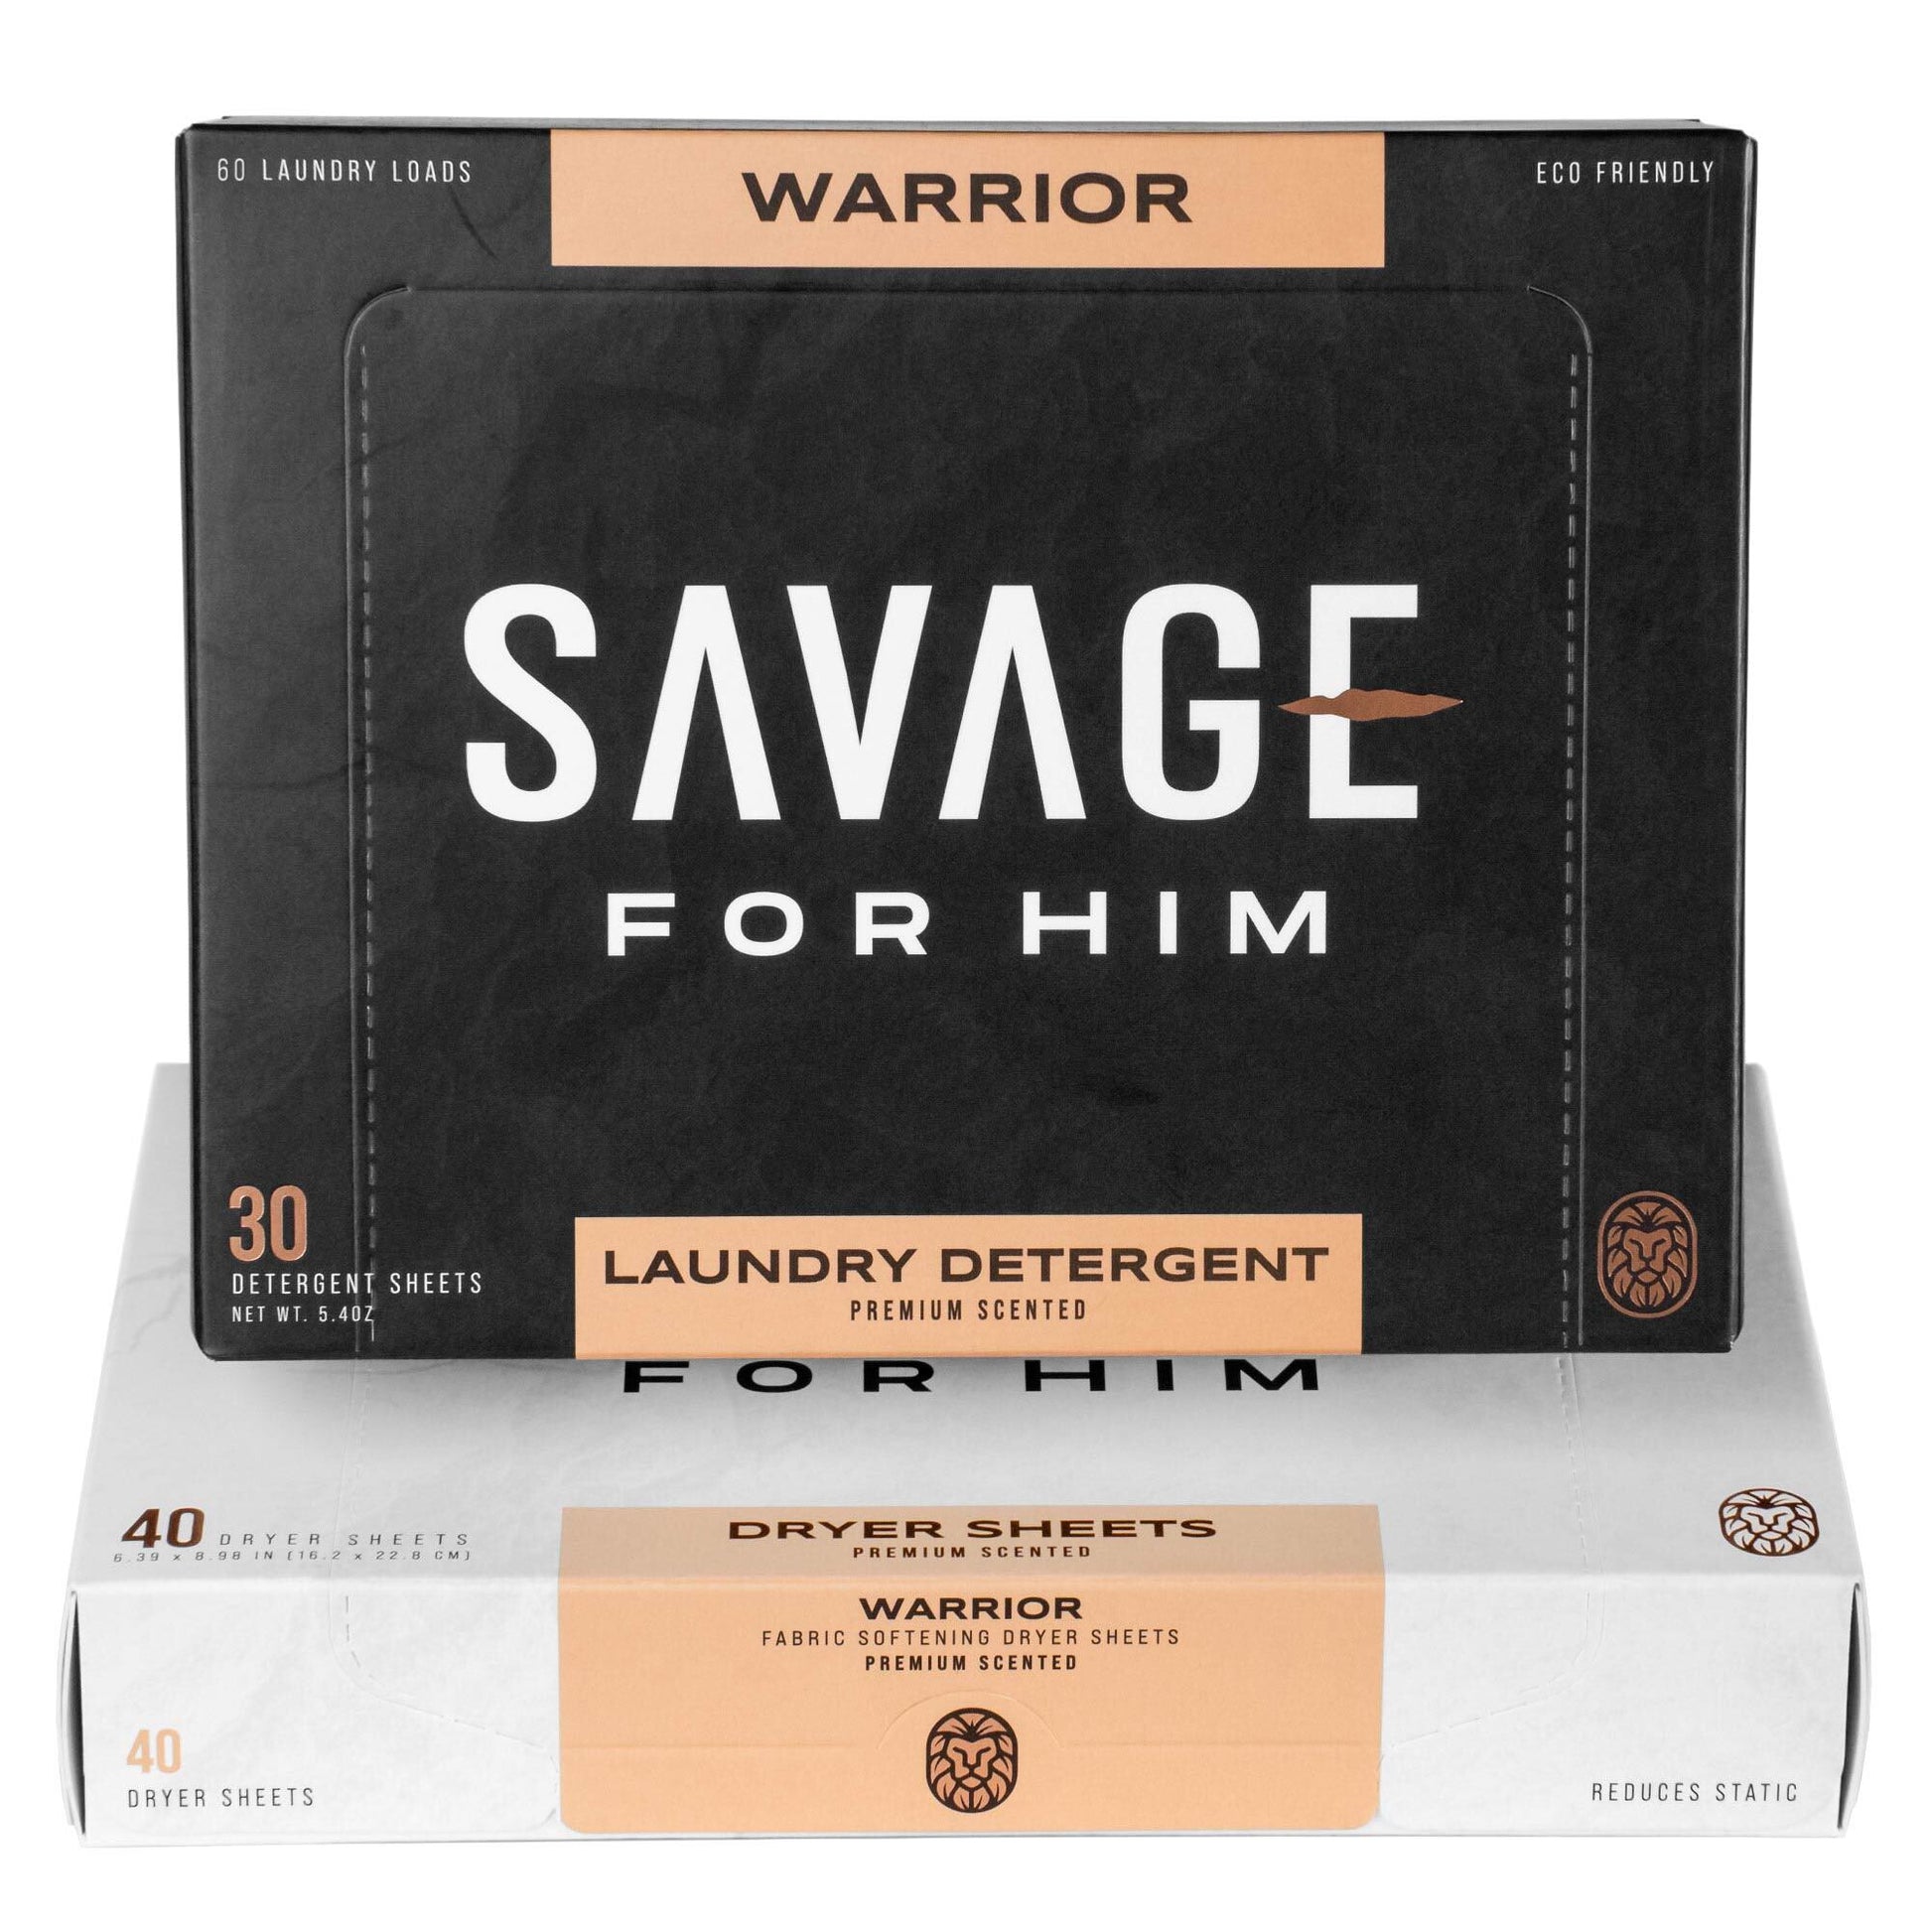 Buy Eco-Friendly Laundry Detergent Sheets Made in USA